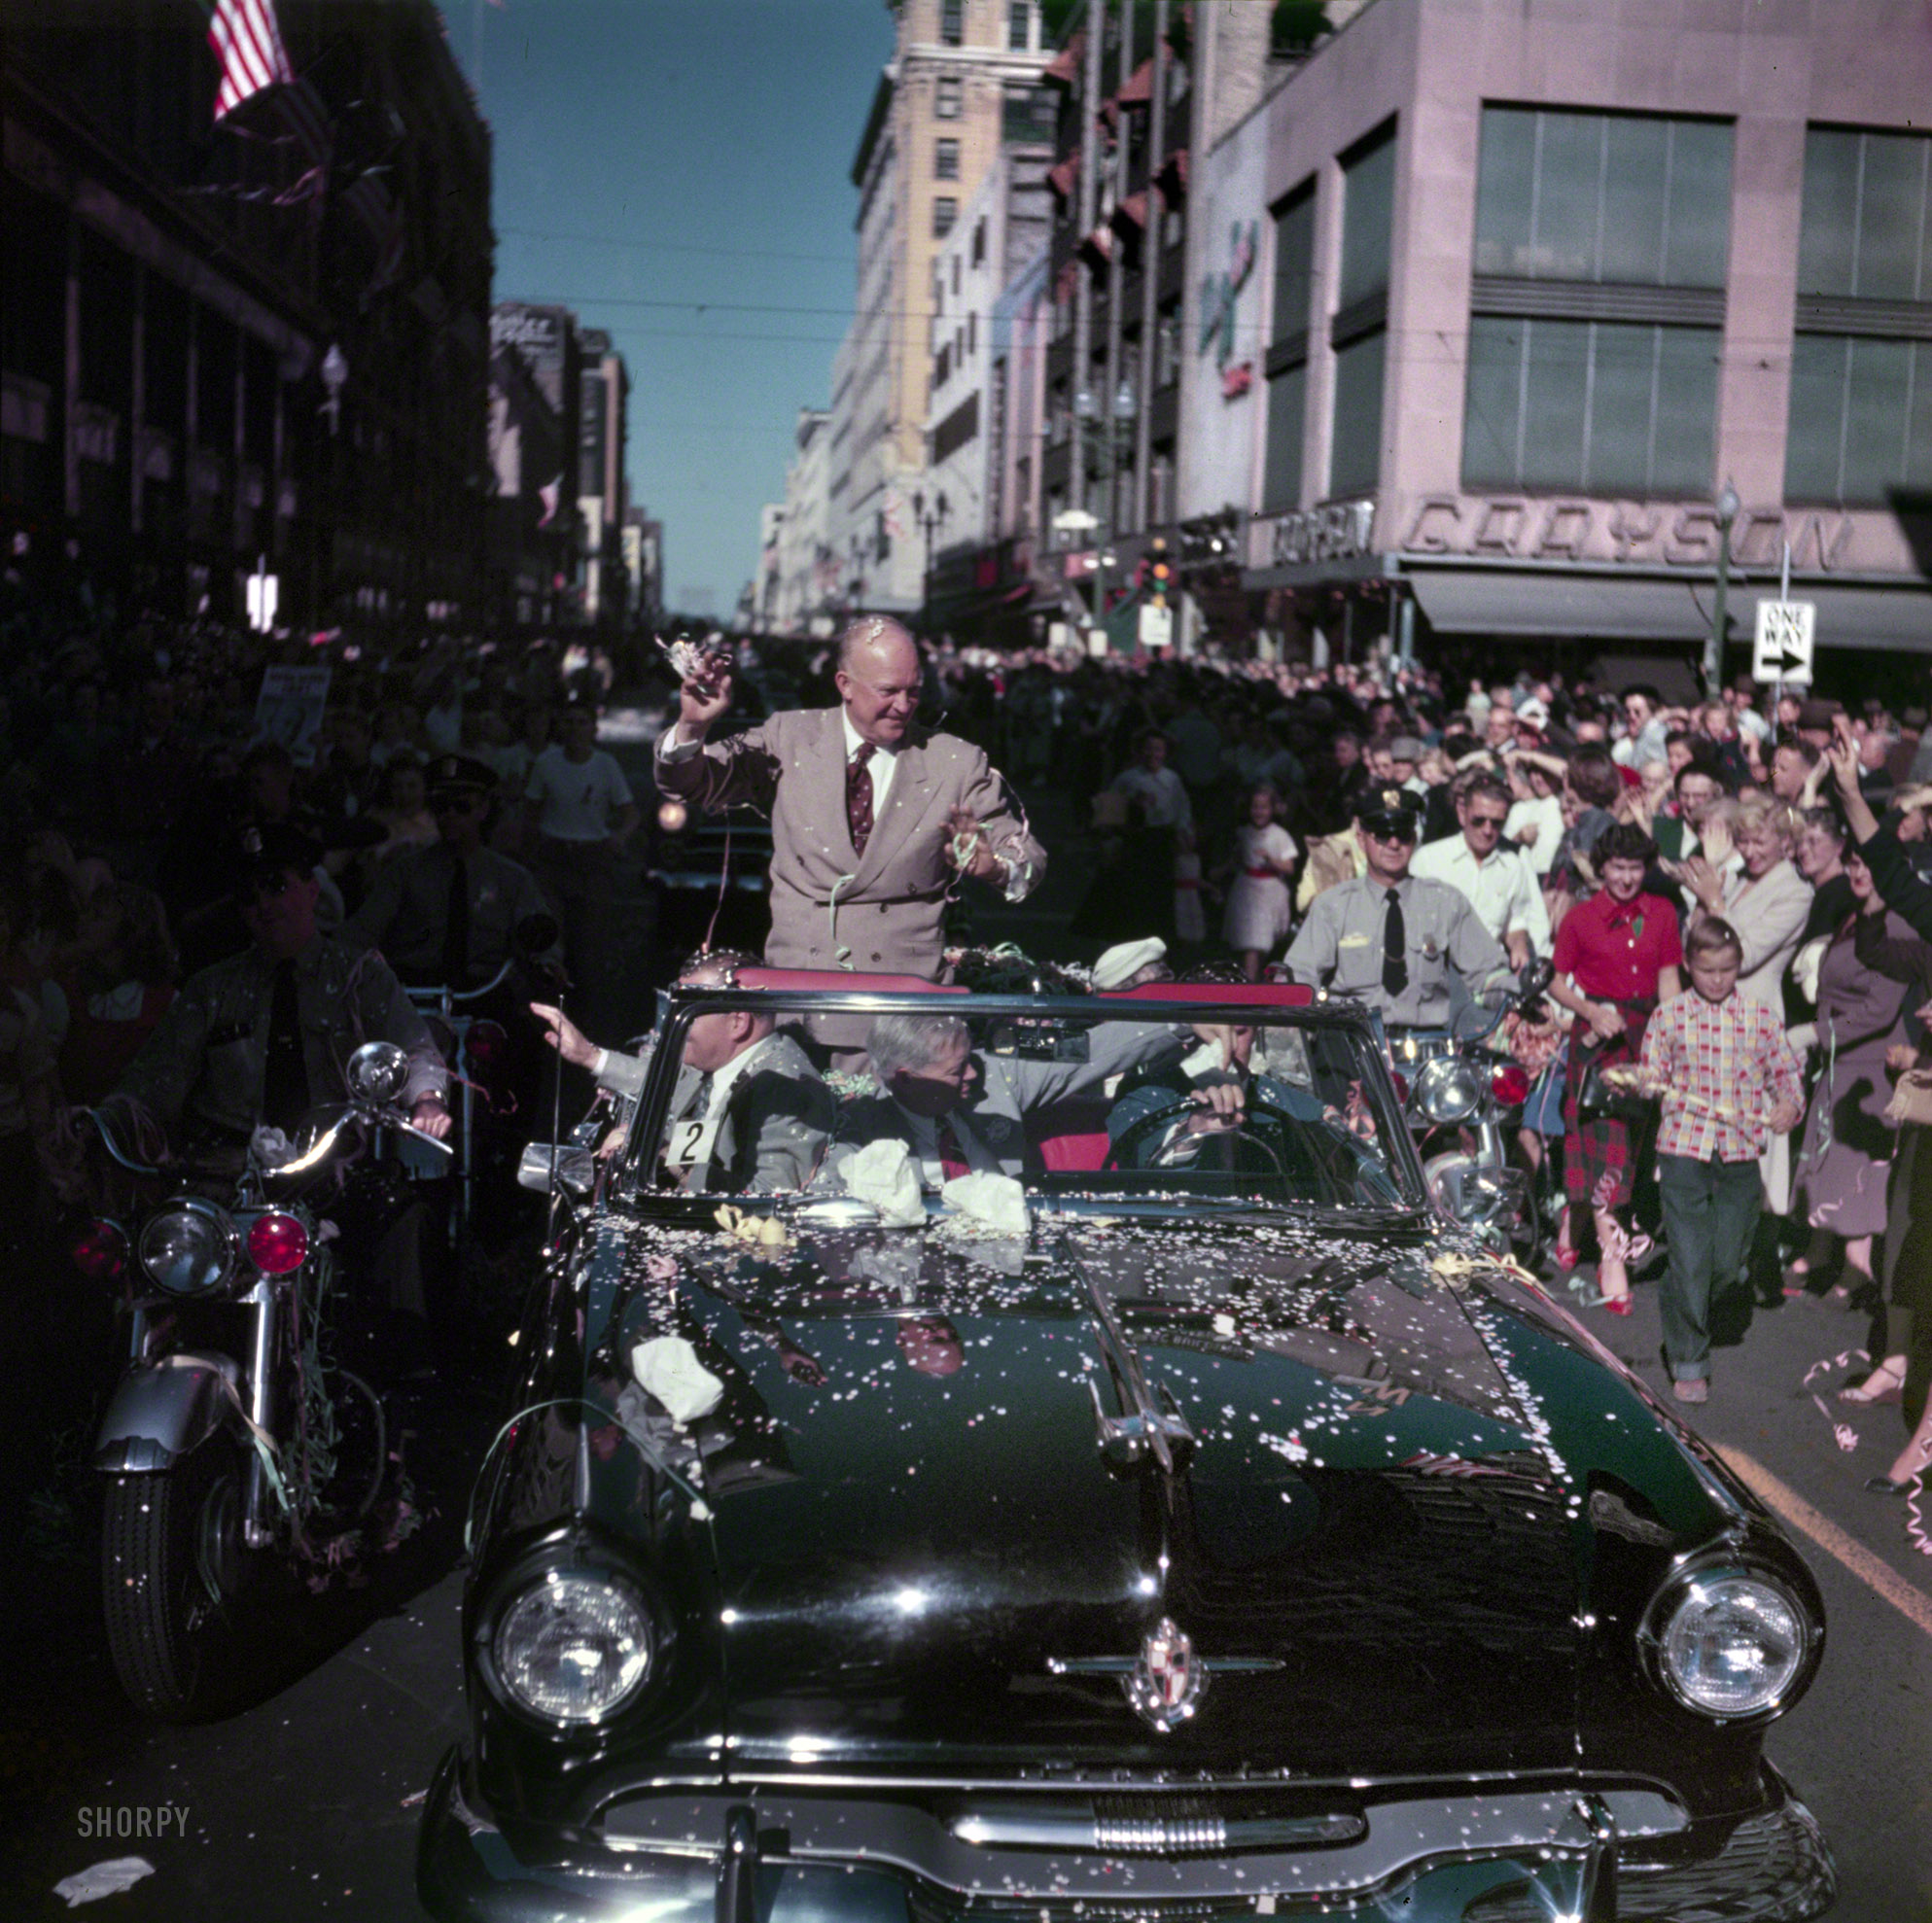 1952. "Republican presidential candidate Dwight Eisenhower in campaign motorcade." Back when Lincoln convertibles were still part of the political scene. Who can name the city? Photo by Charlotte Brooks for the Look magazine assignment "The G.O.P.'s Future Will Be Up to Ike." View full size.